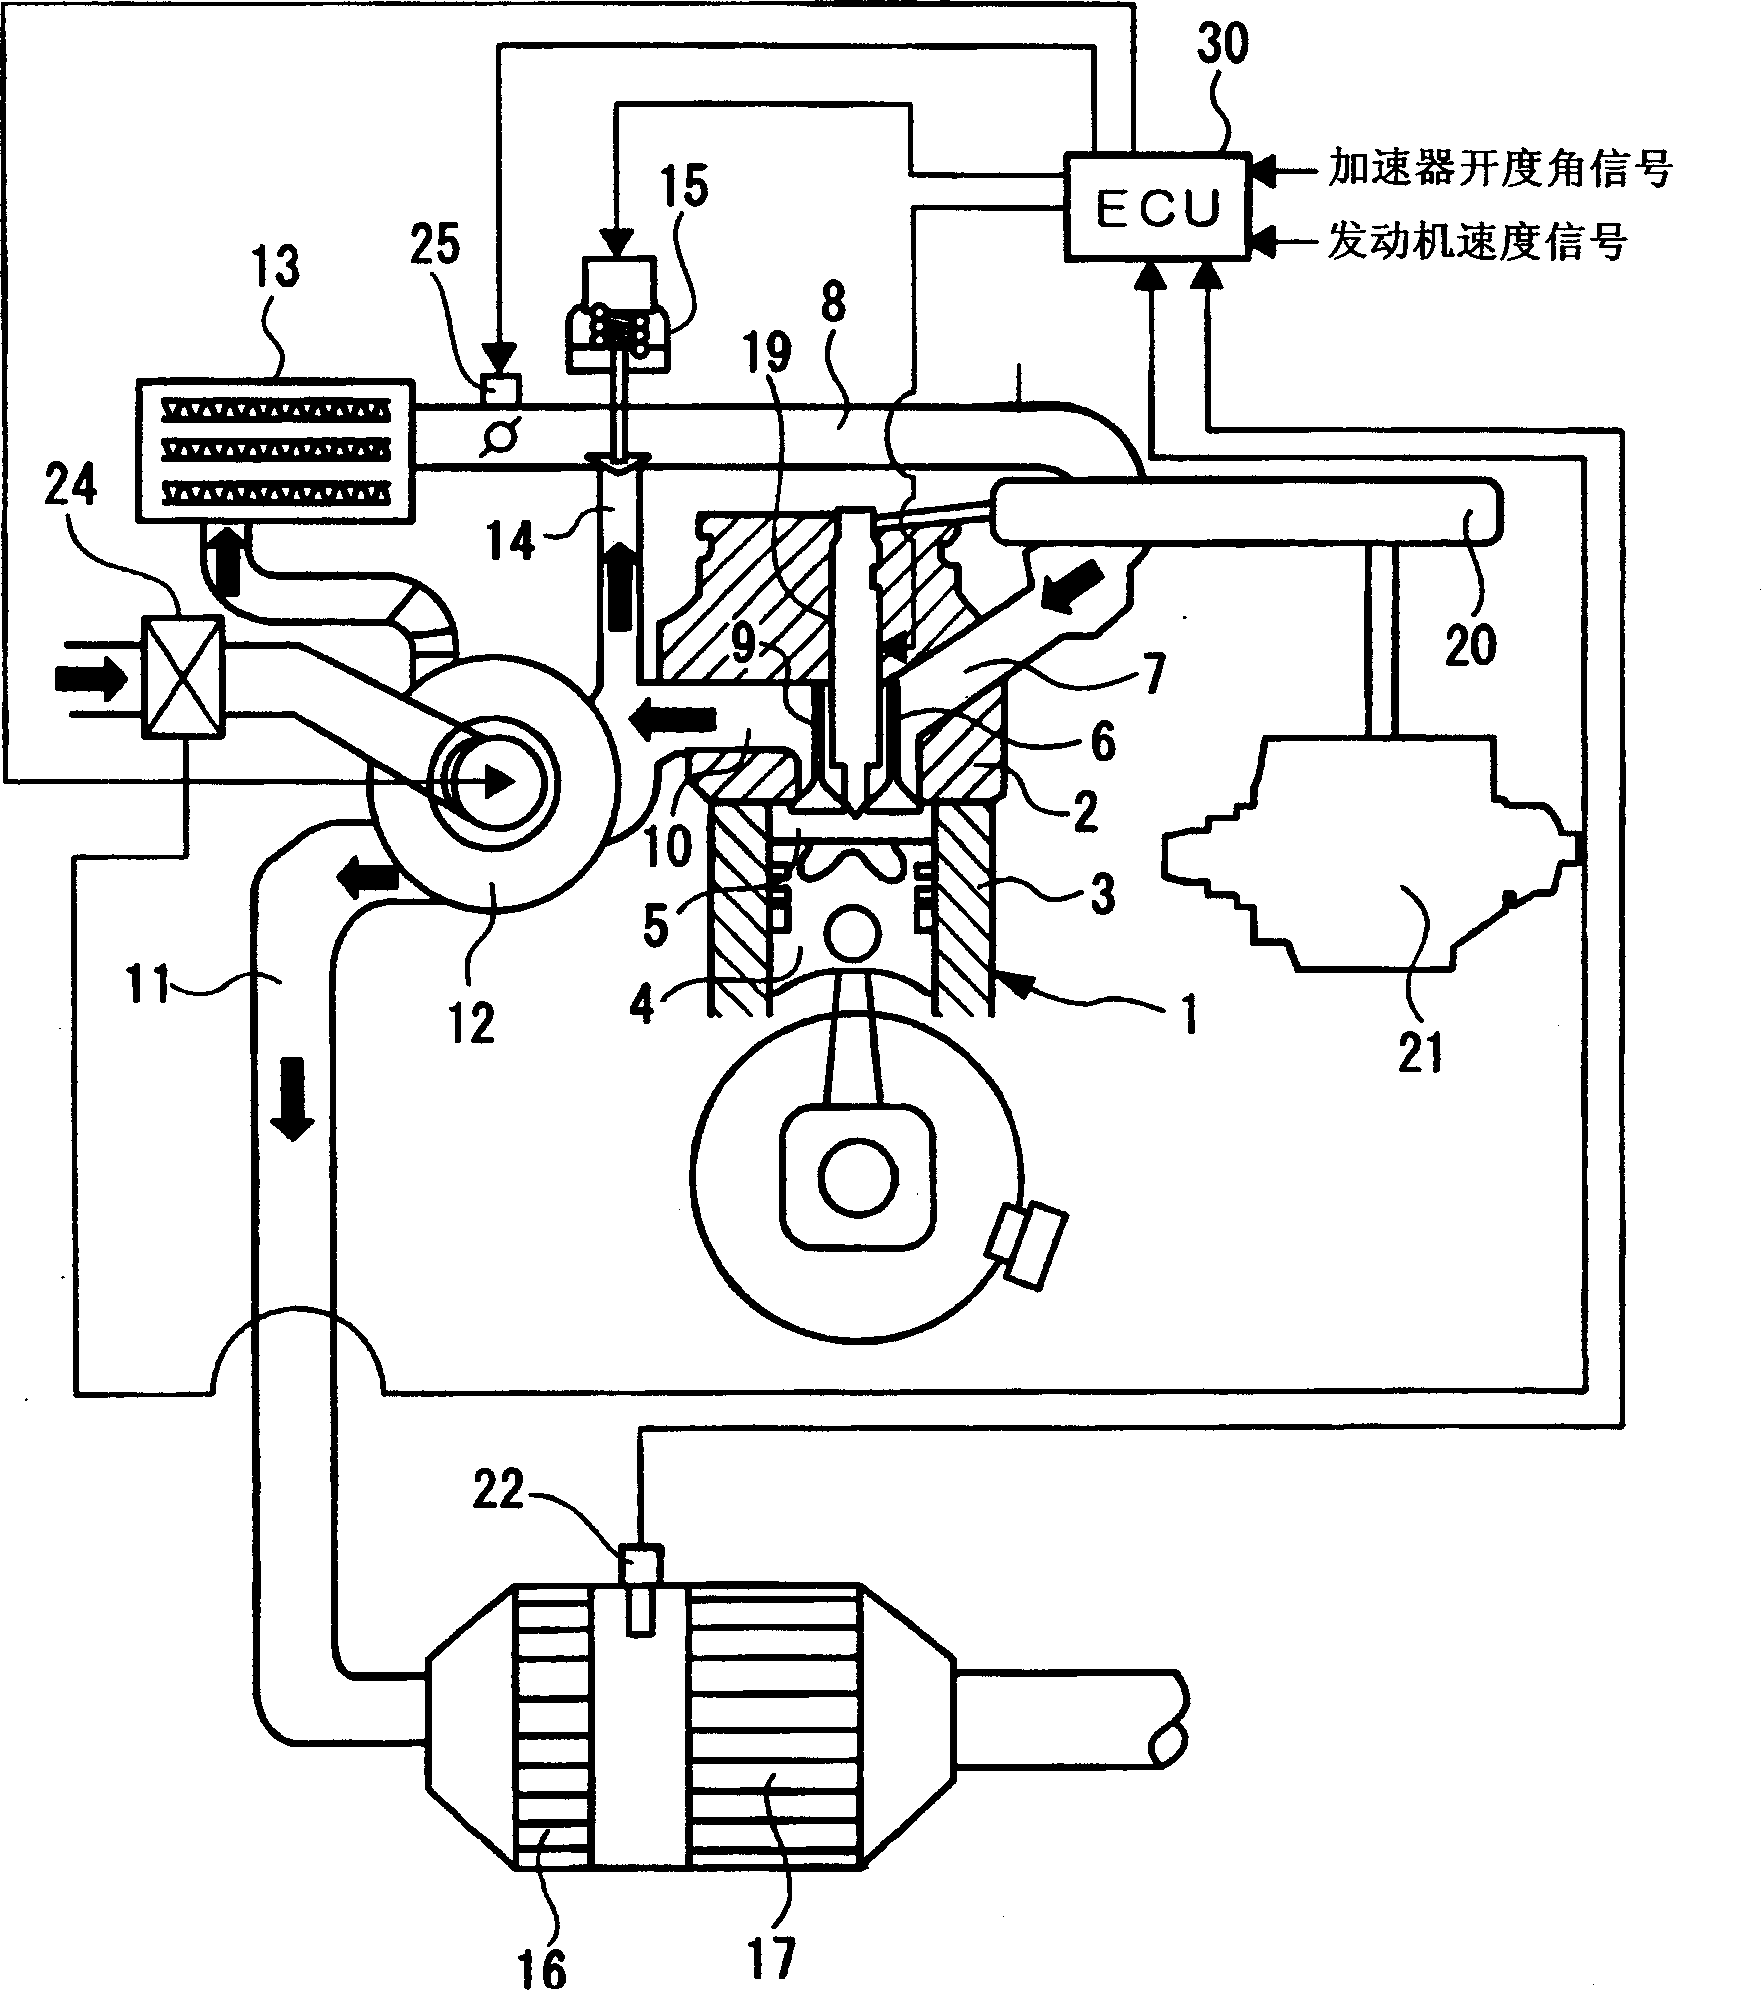 Exhaust emission control device of internal combustion engine